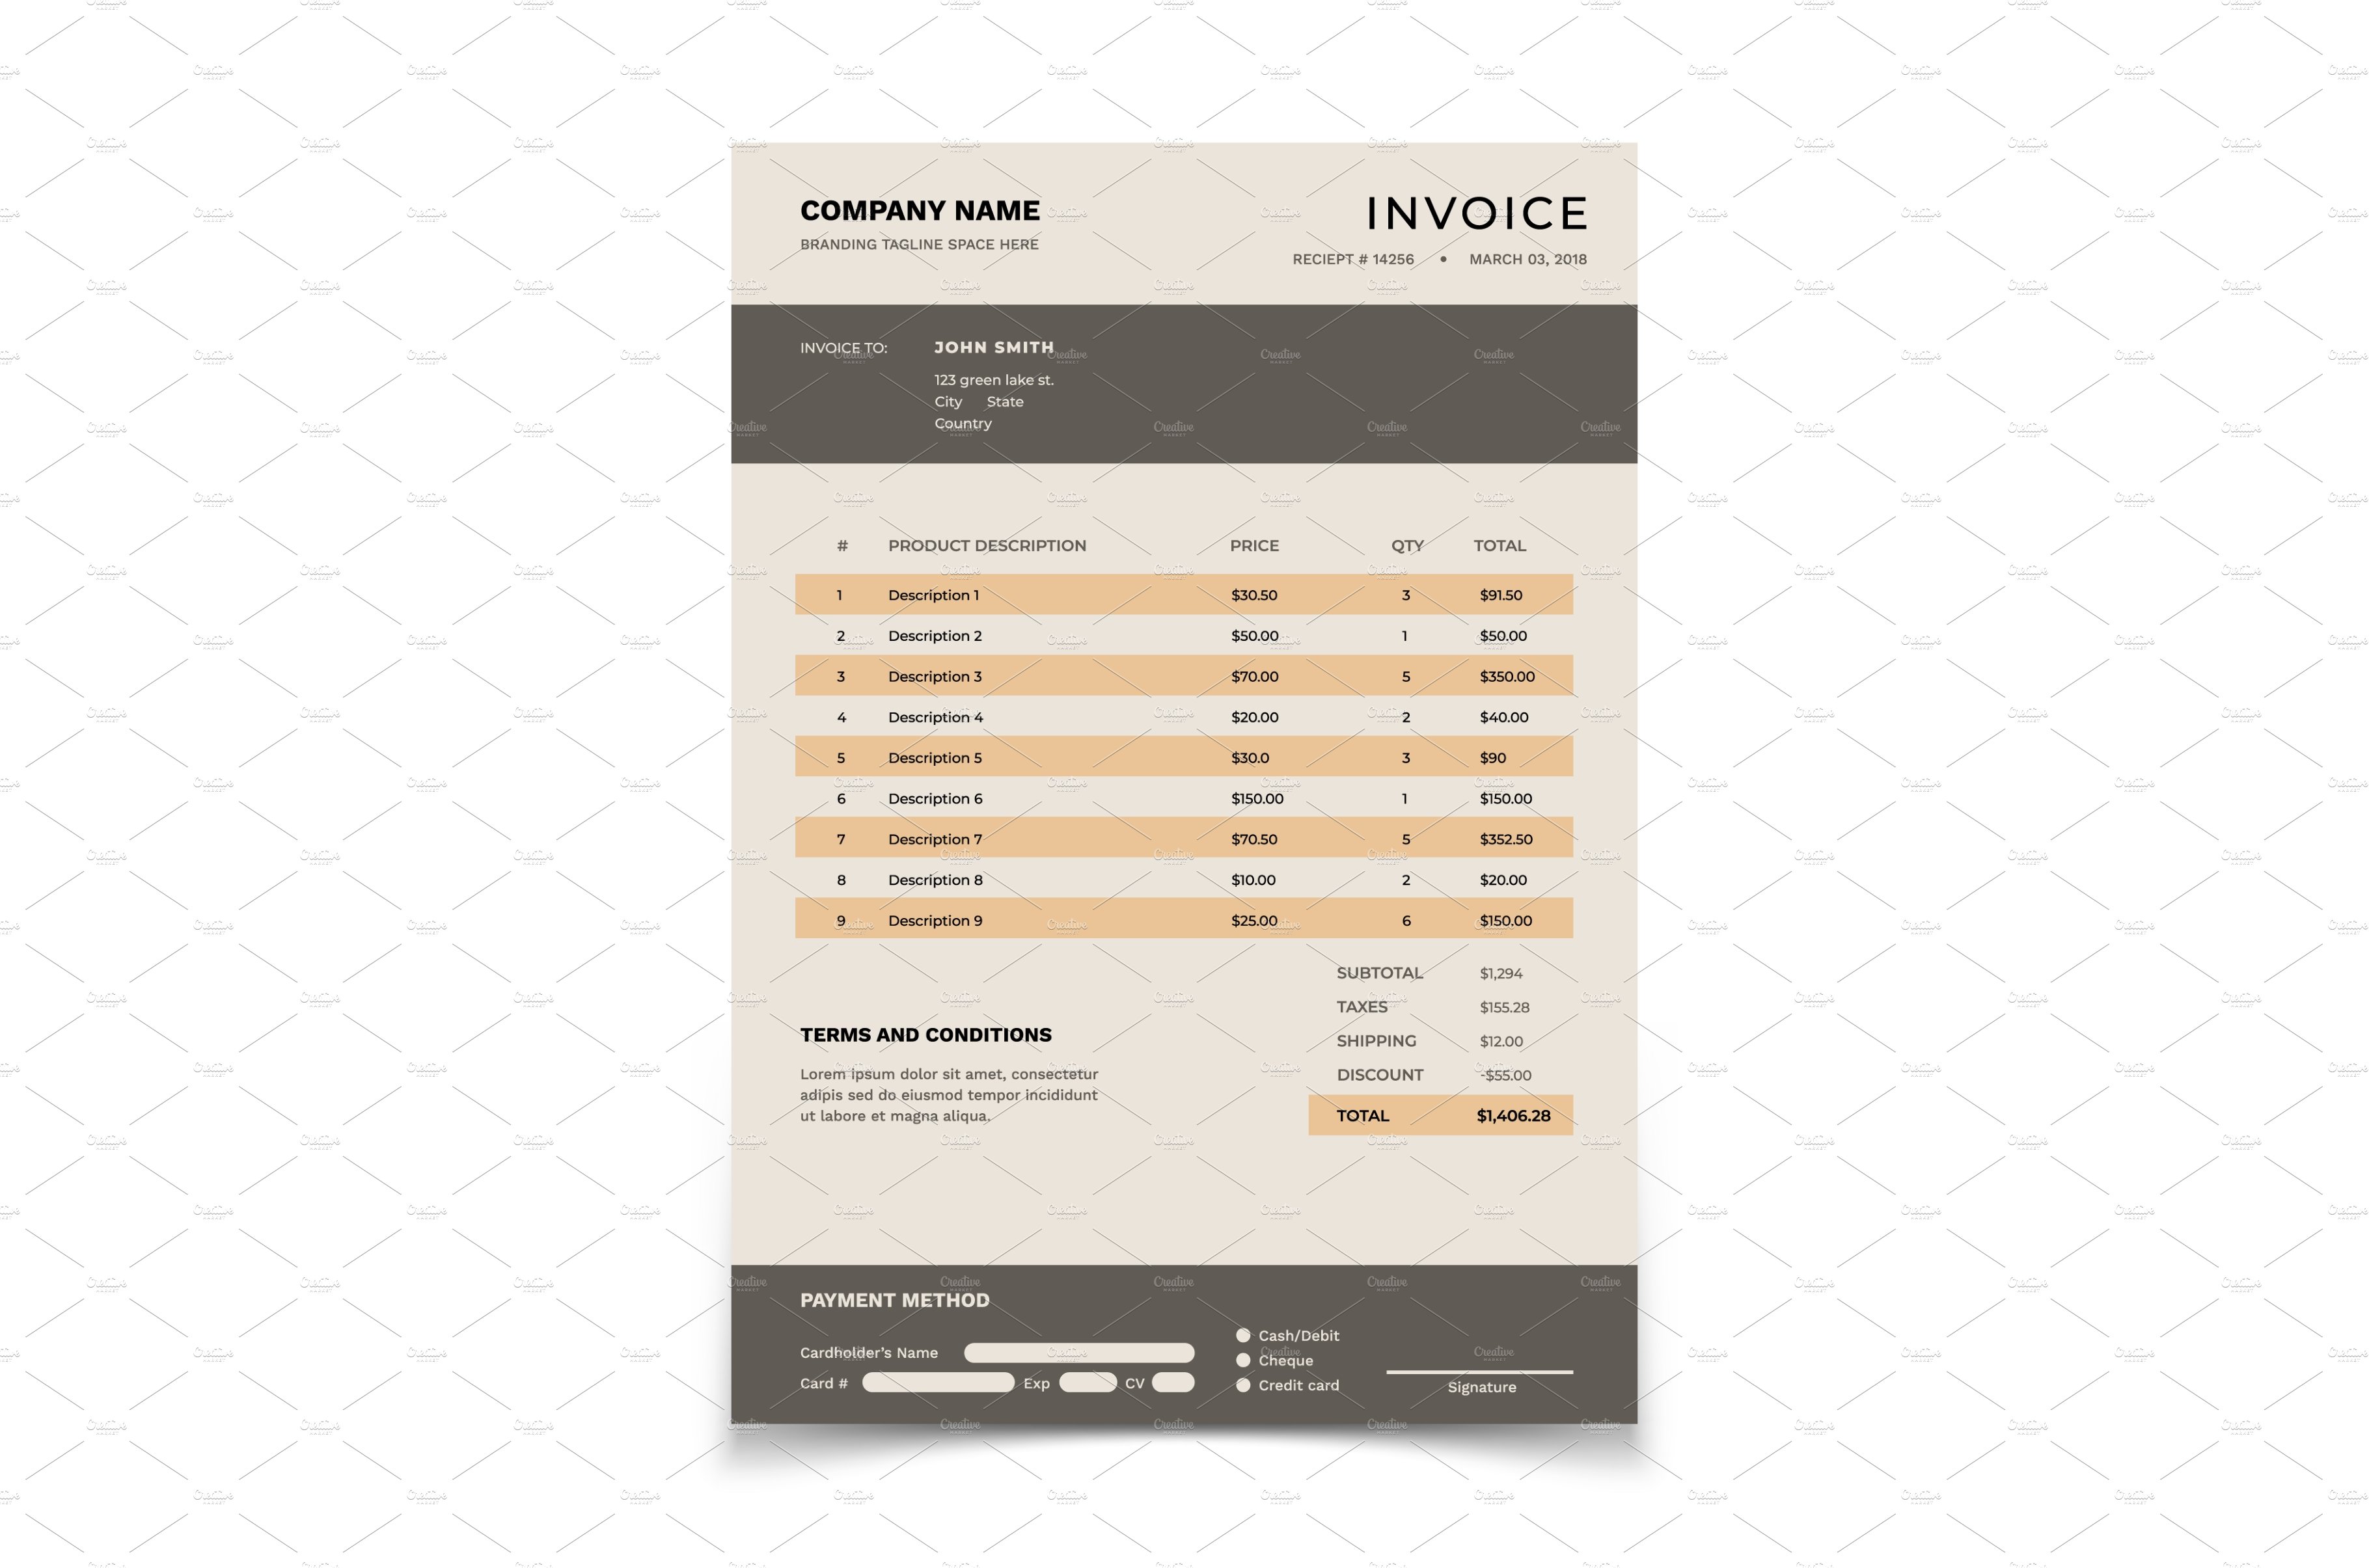 Invoice template. Bill form with cover image.